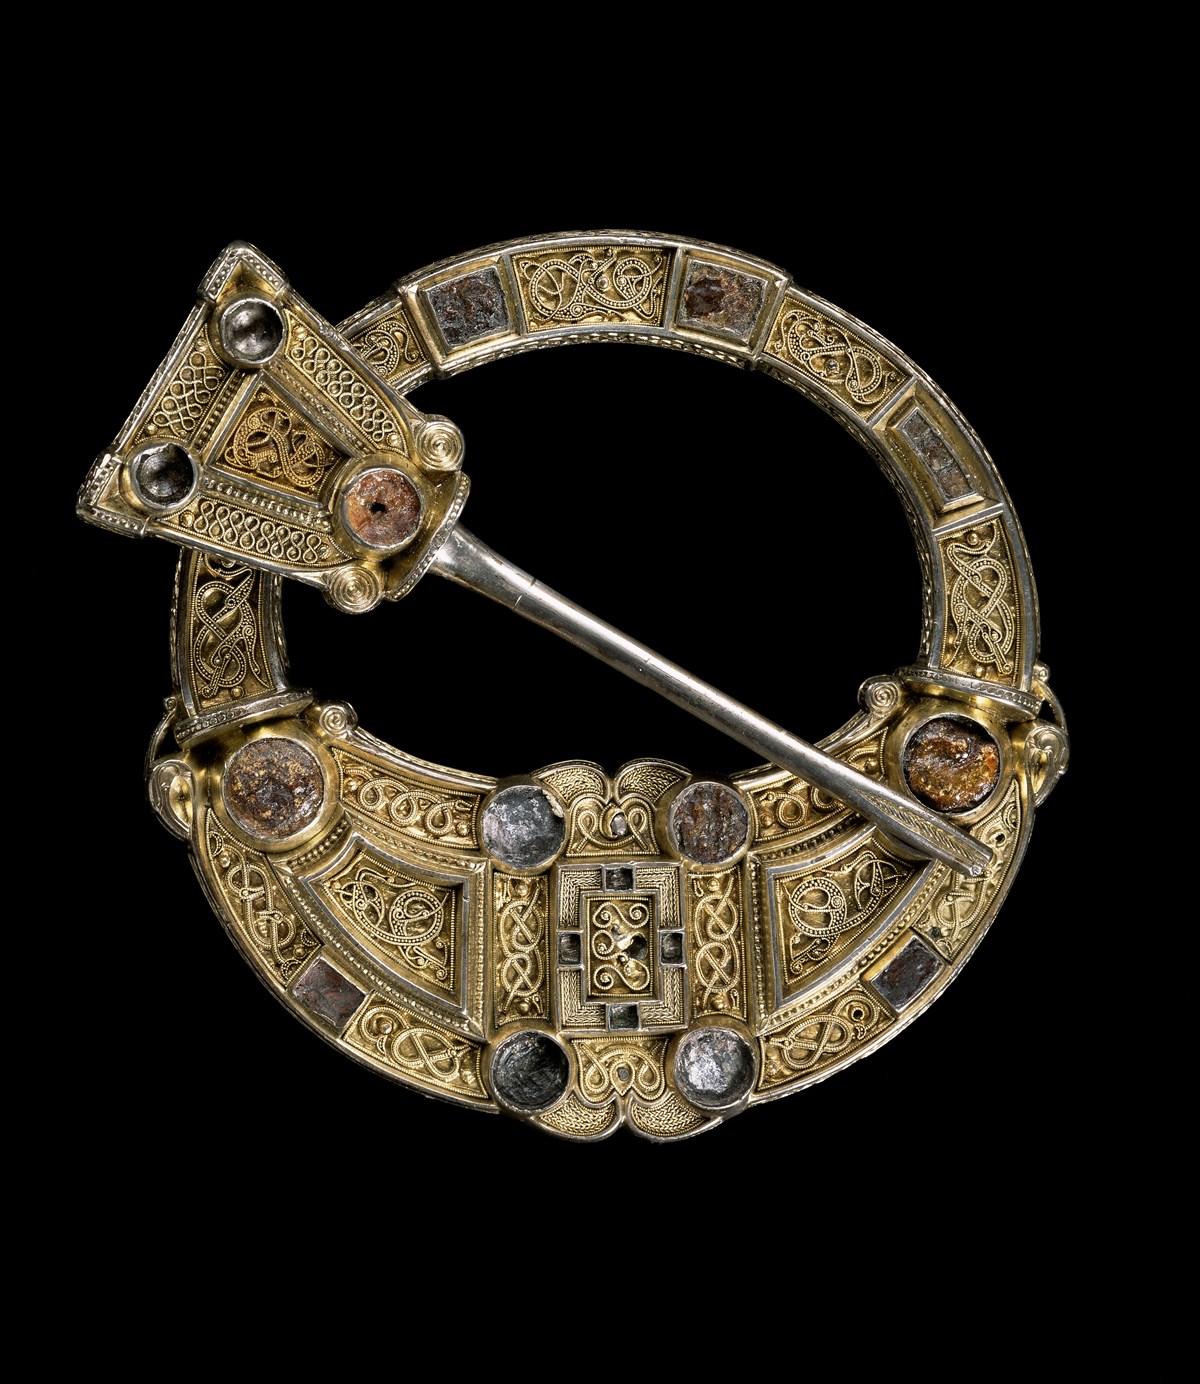 Hunterston Brooch, c. 700 AD. Image © National Museums Scotland